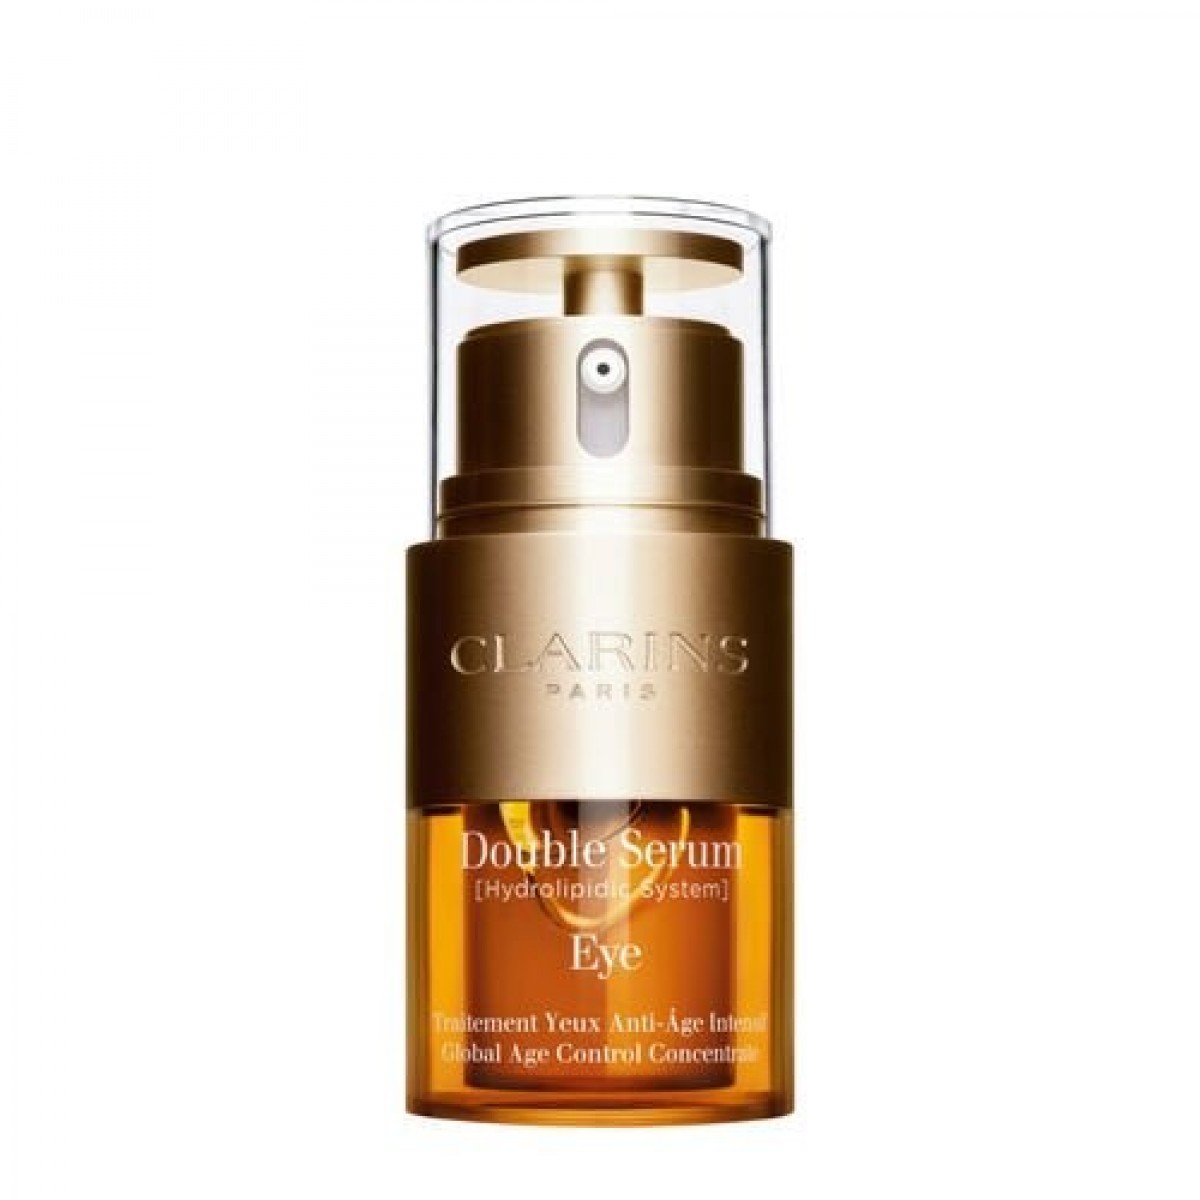 Double Serum Eye Complete Age Control Concentrate